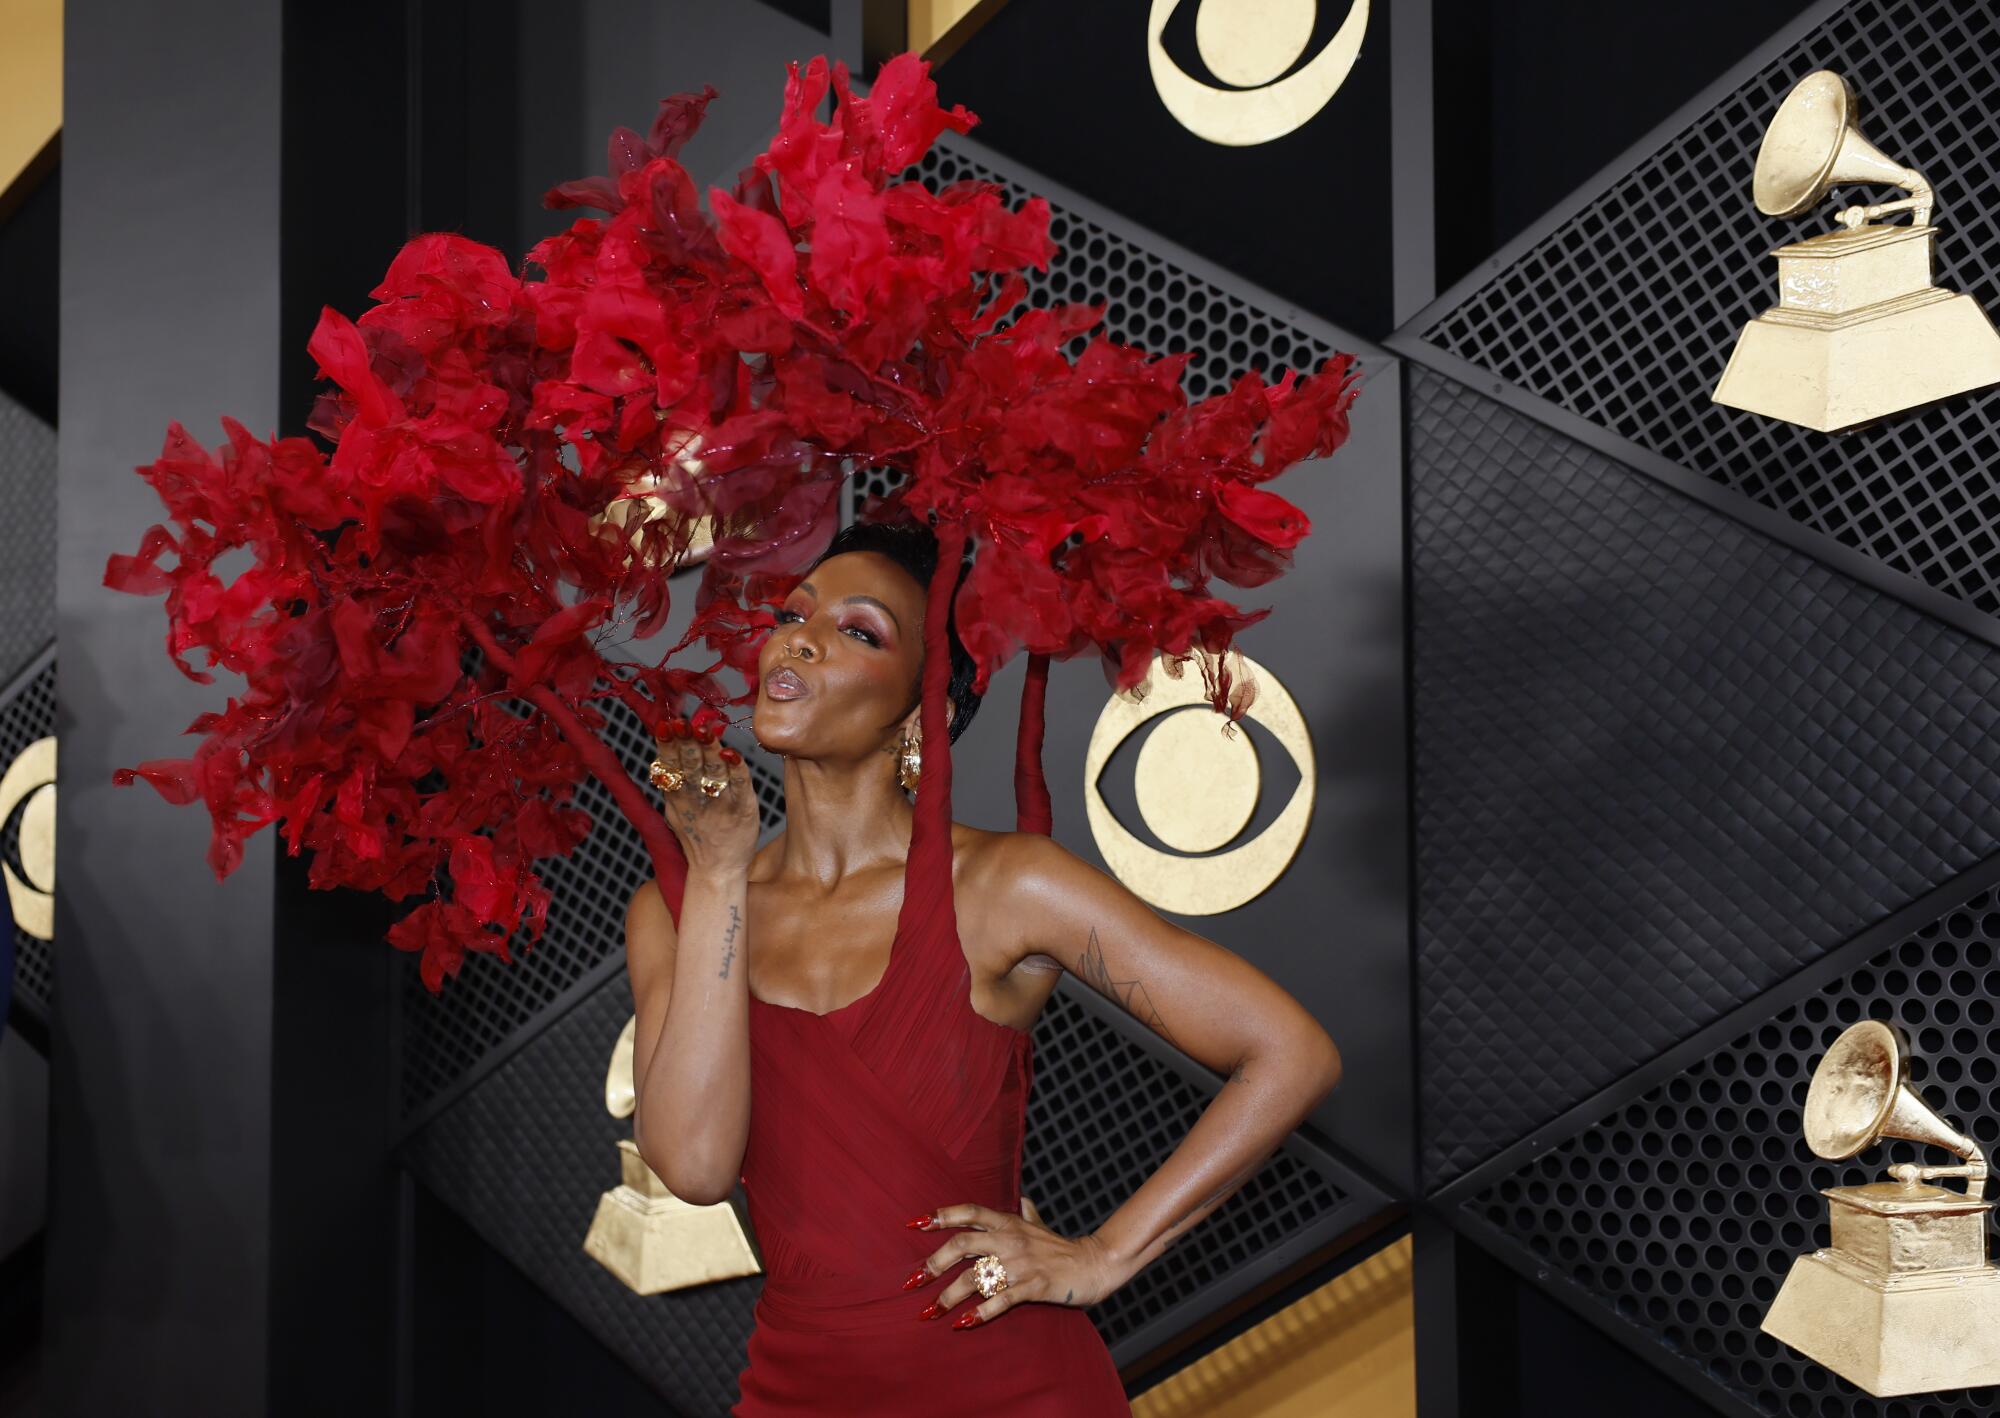 Dawn Richard blowing a kiss in a red dress that connects at the shoulders to an elaborate red floral headpiece